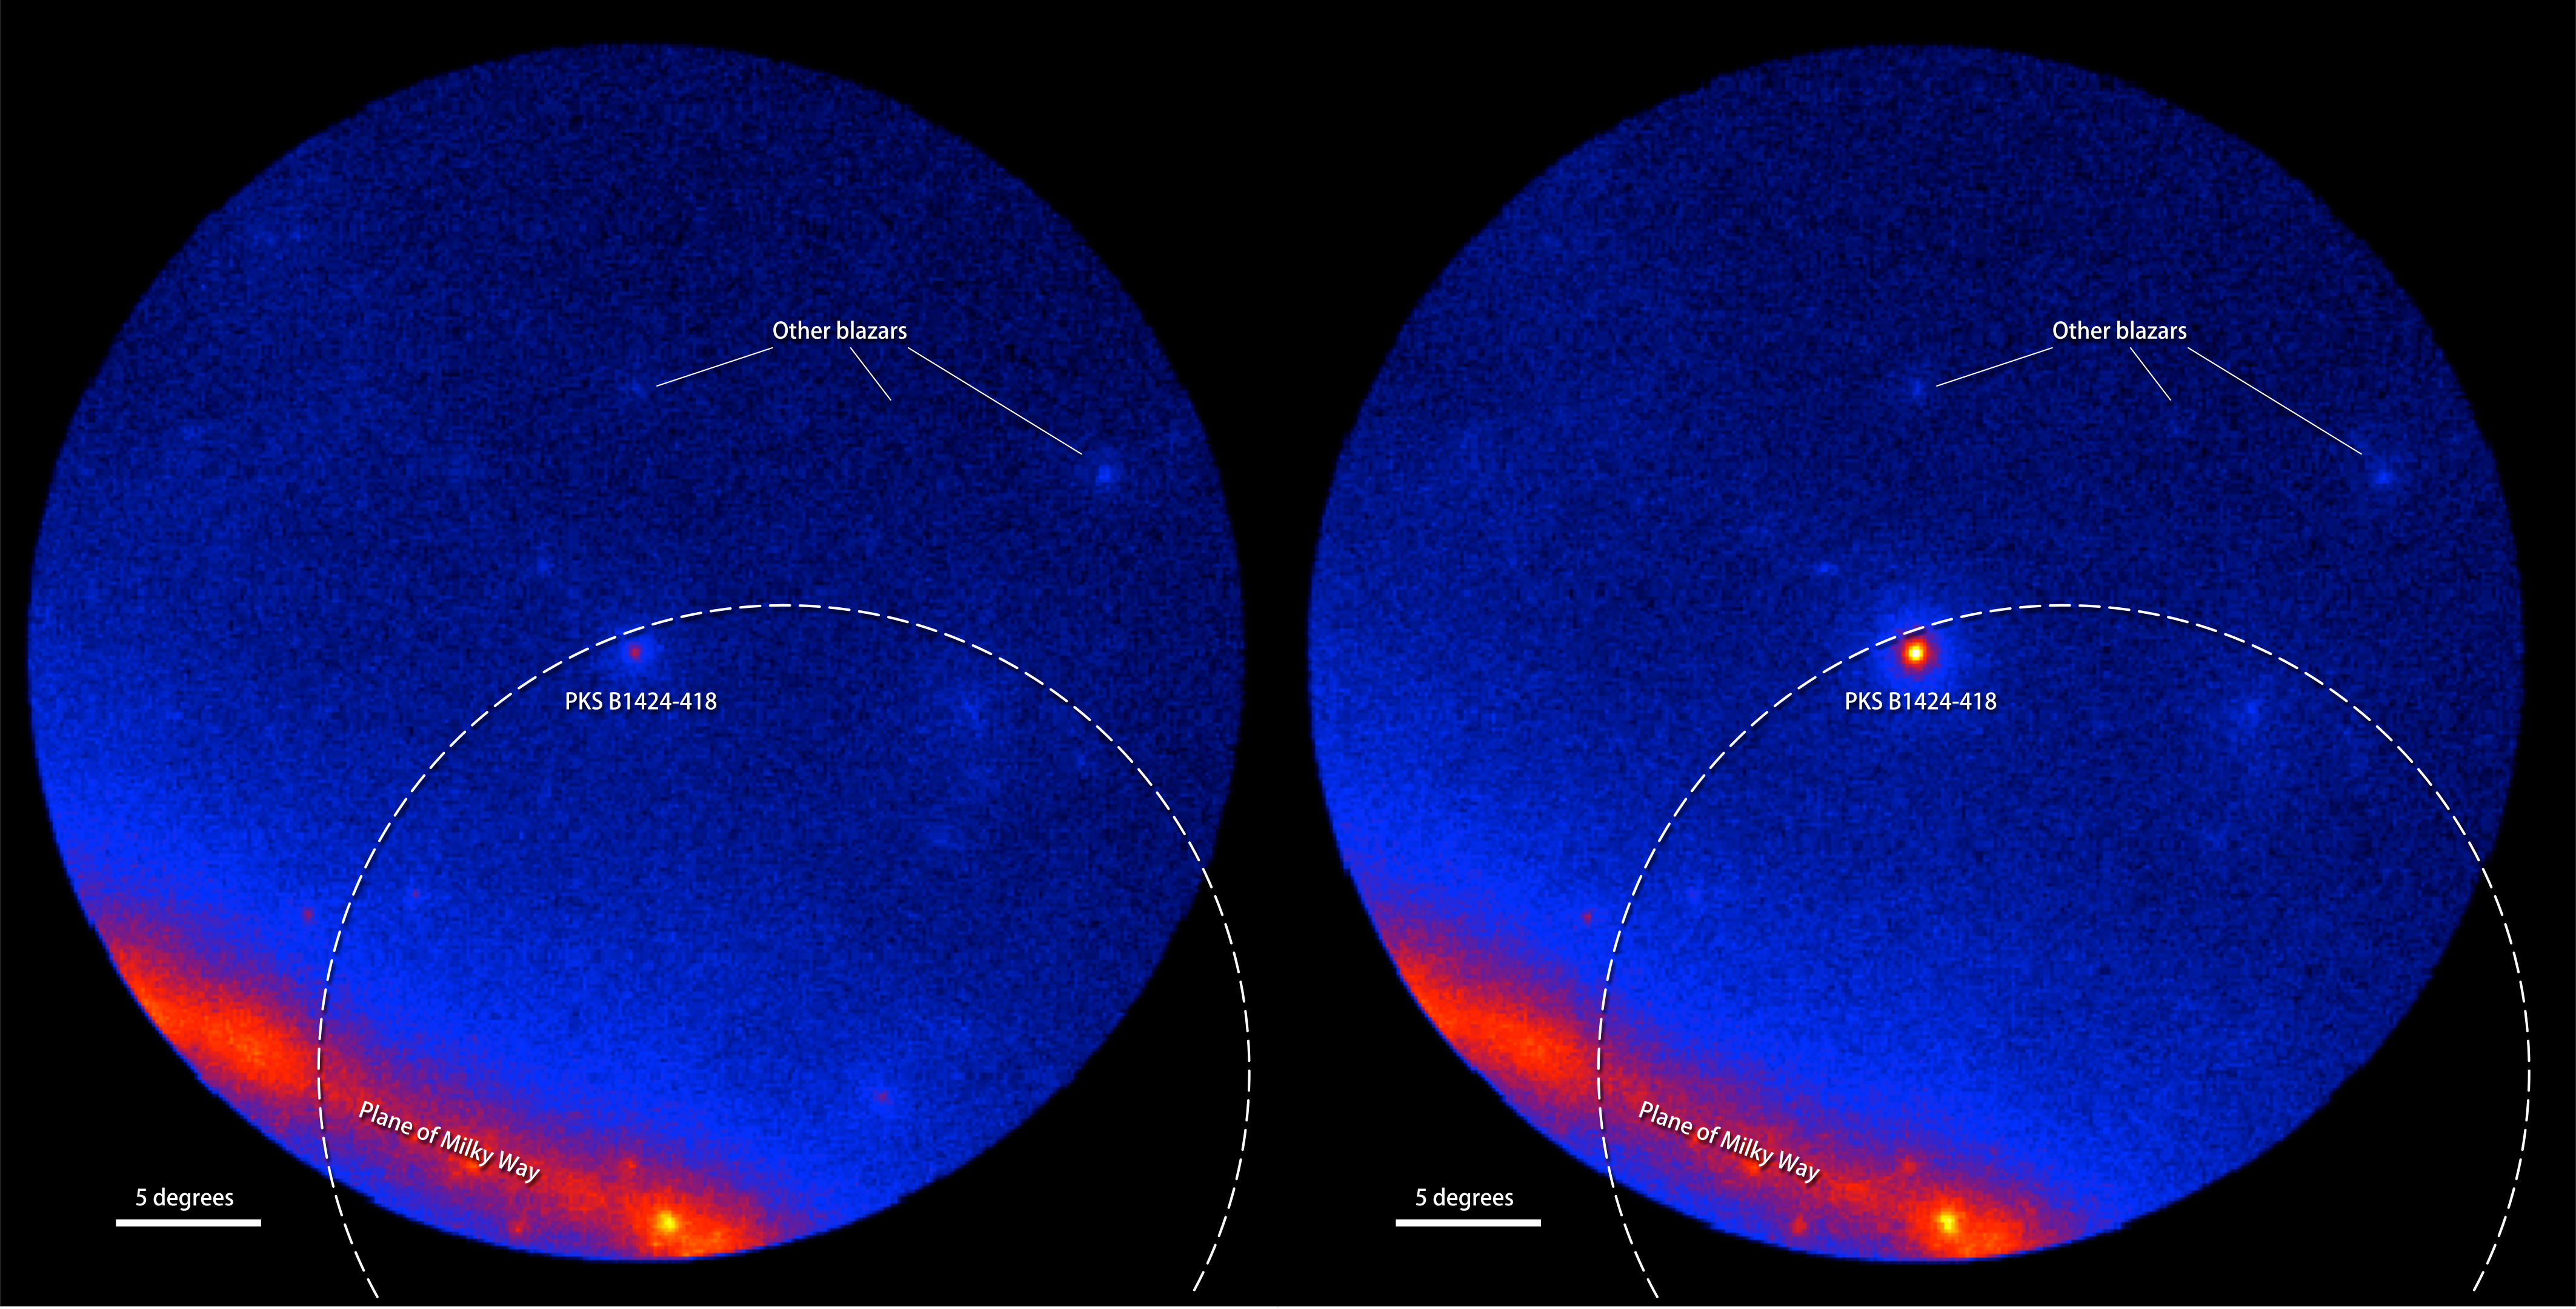 Labeled version. Fermi LAT images showing the gamma-ray sky around the blazar PKS B1424-418. Brighter colors indicate greater numbers of gamma rays. The dashed arc marks part of the source region established by IceCube for the Big Bird neutrino (50-percent confidence level). Left: An average of LAT data centered on July 8, 2011, and covering 300 days when the blazar was inactive. Right: An average of 300 active days centered on Feb. 27, 2013, when PKS B1424-418 was the brightest blazar in this part of the sky. Credit: NASA/DOE/LAT Collaboration